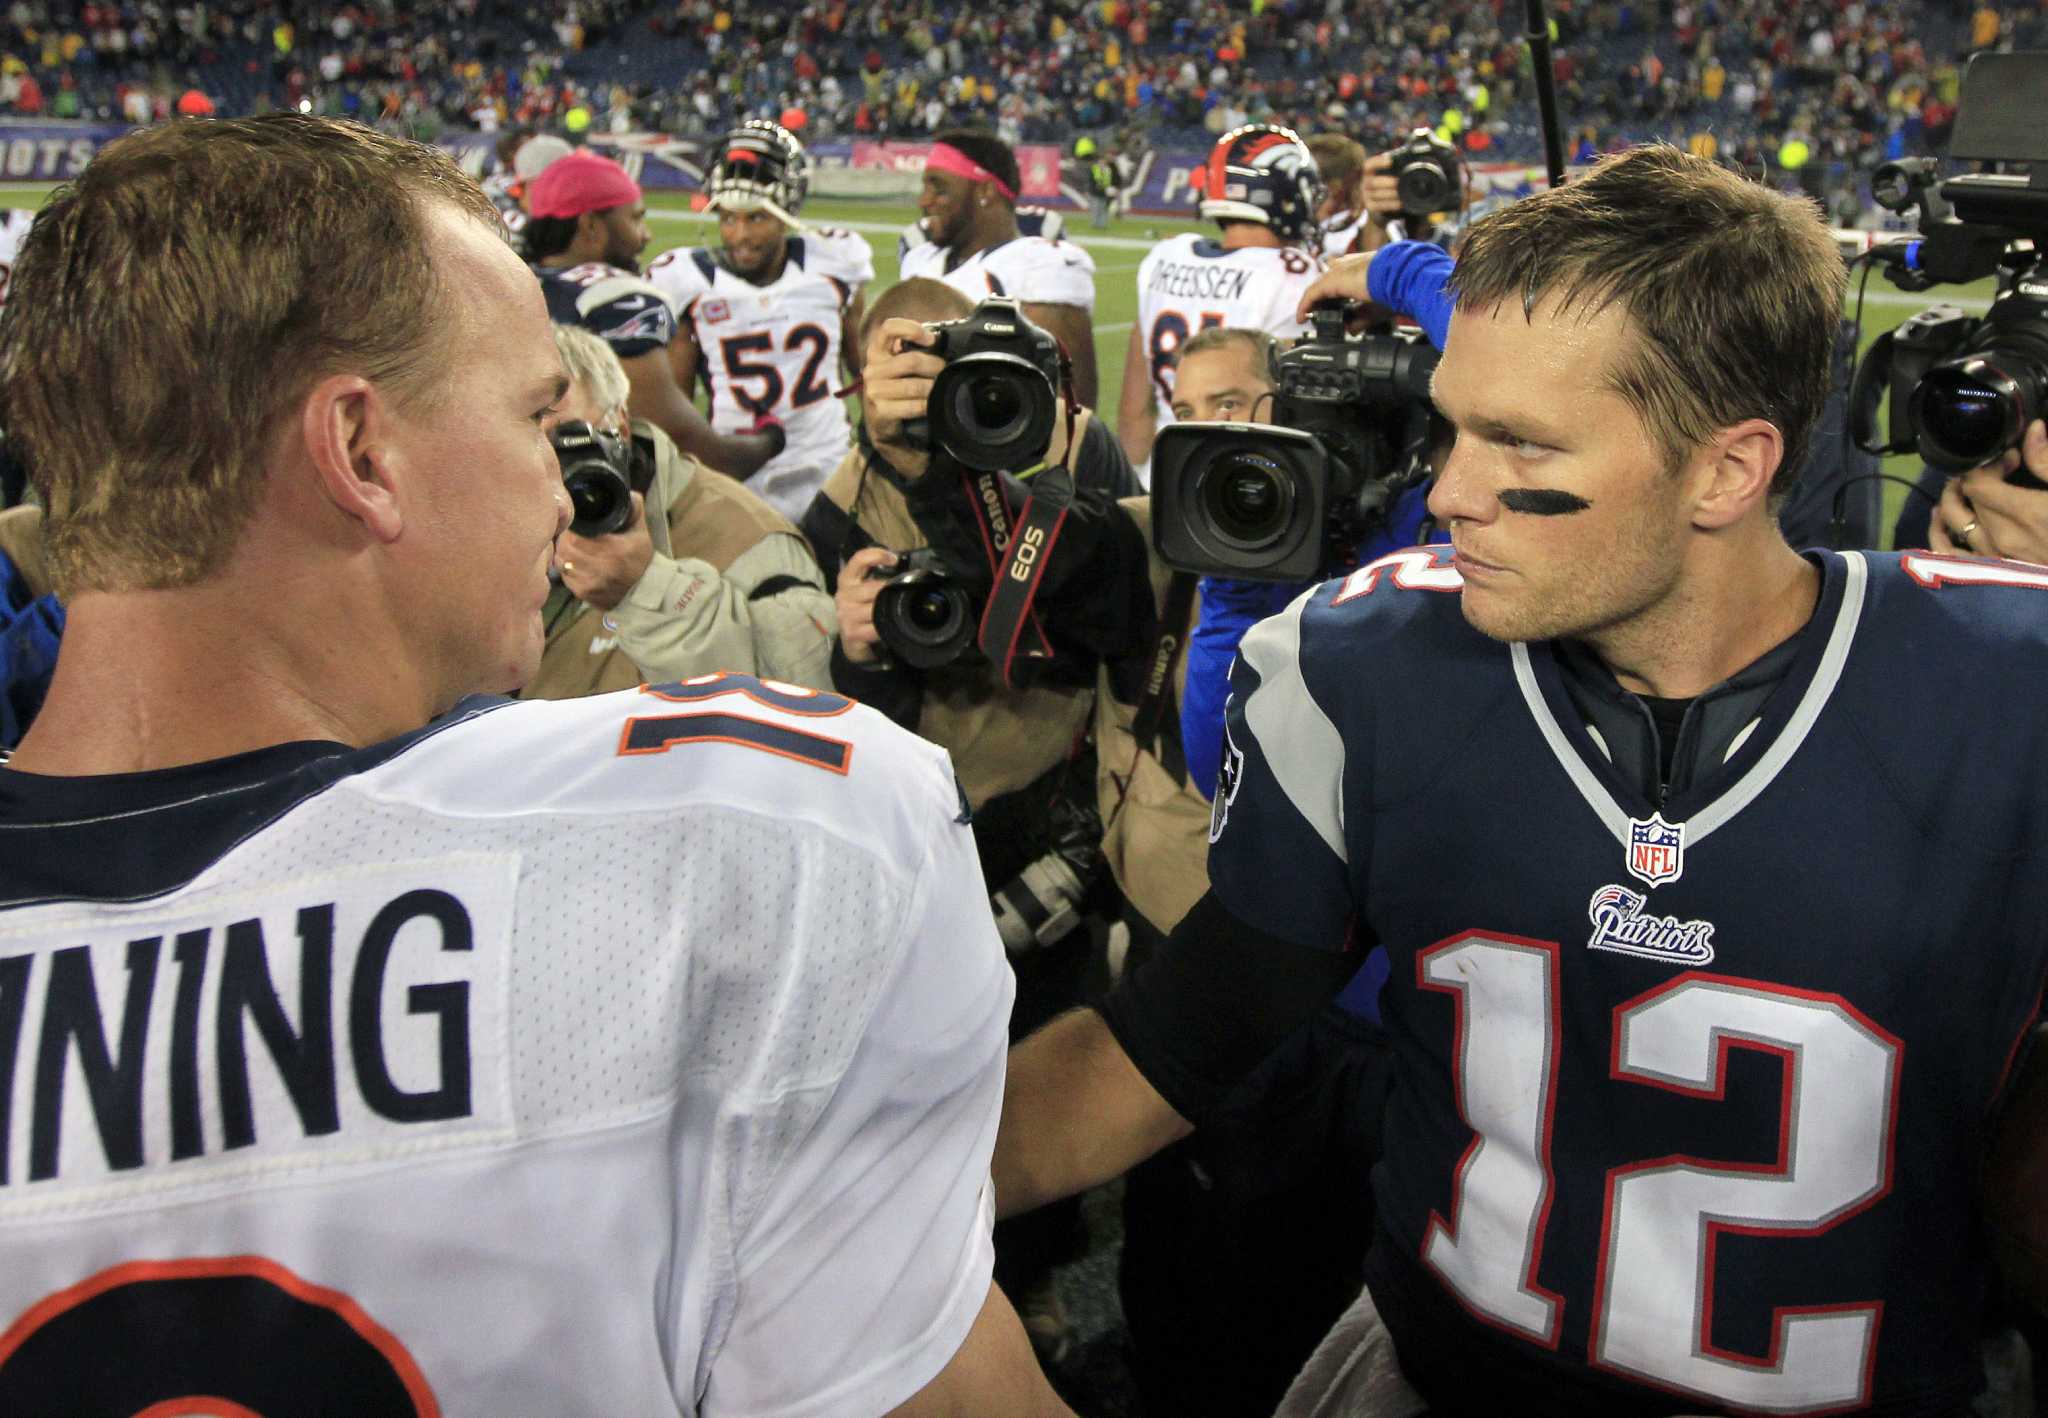 The Brady-Manning Rivalry - Sports Illustrated